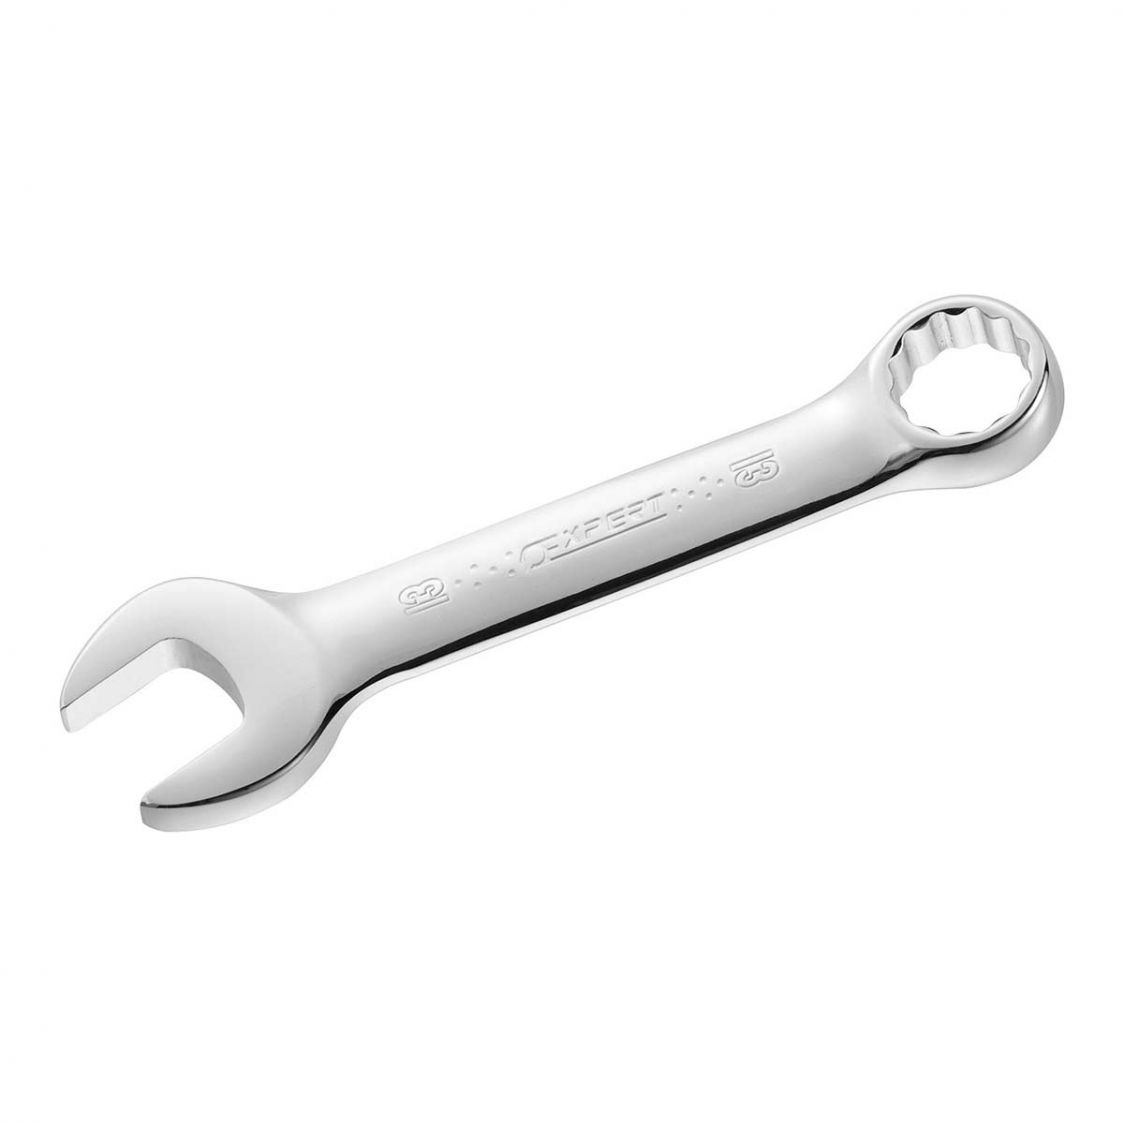 EXPERT by FACOM E110115 - 19mm Metric Stubby Combination Spanner